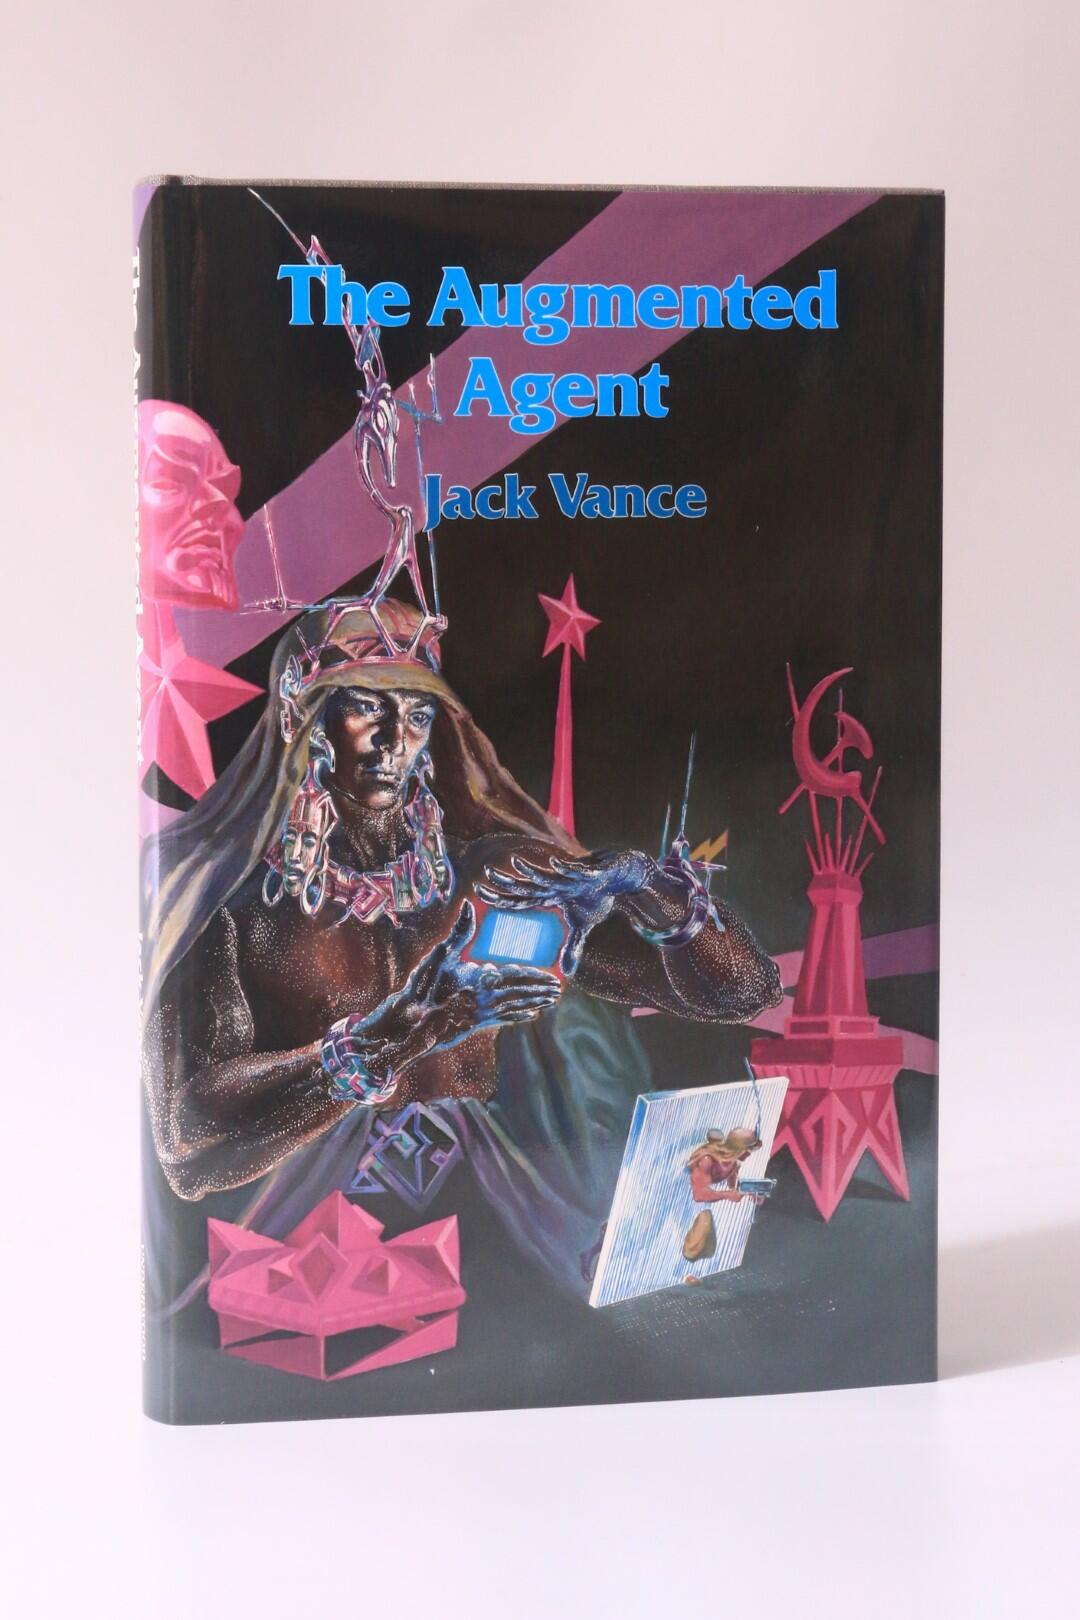 Jack Vance - The Augmented Agent - Underwood-Miller, 1986, Signed Limited Edition.